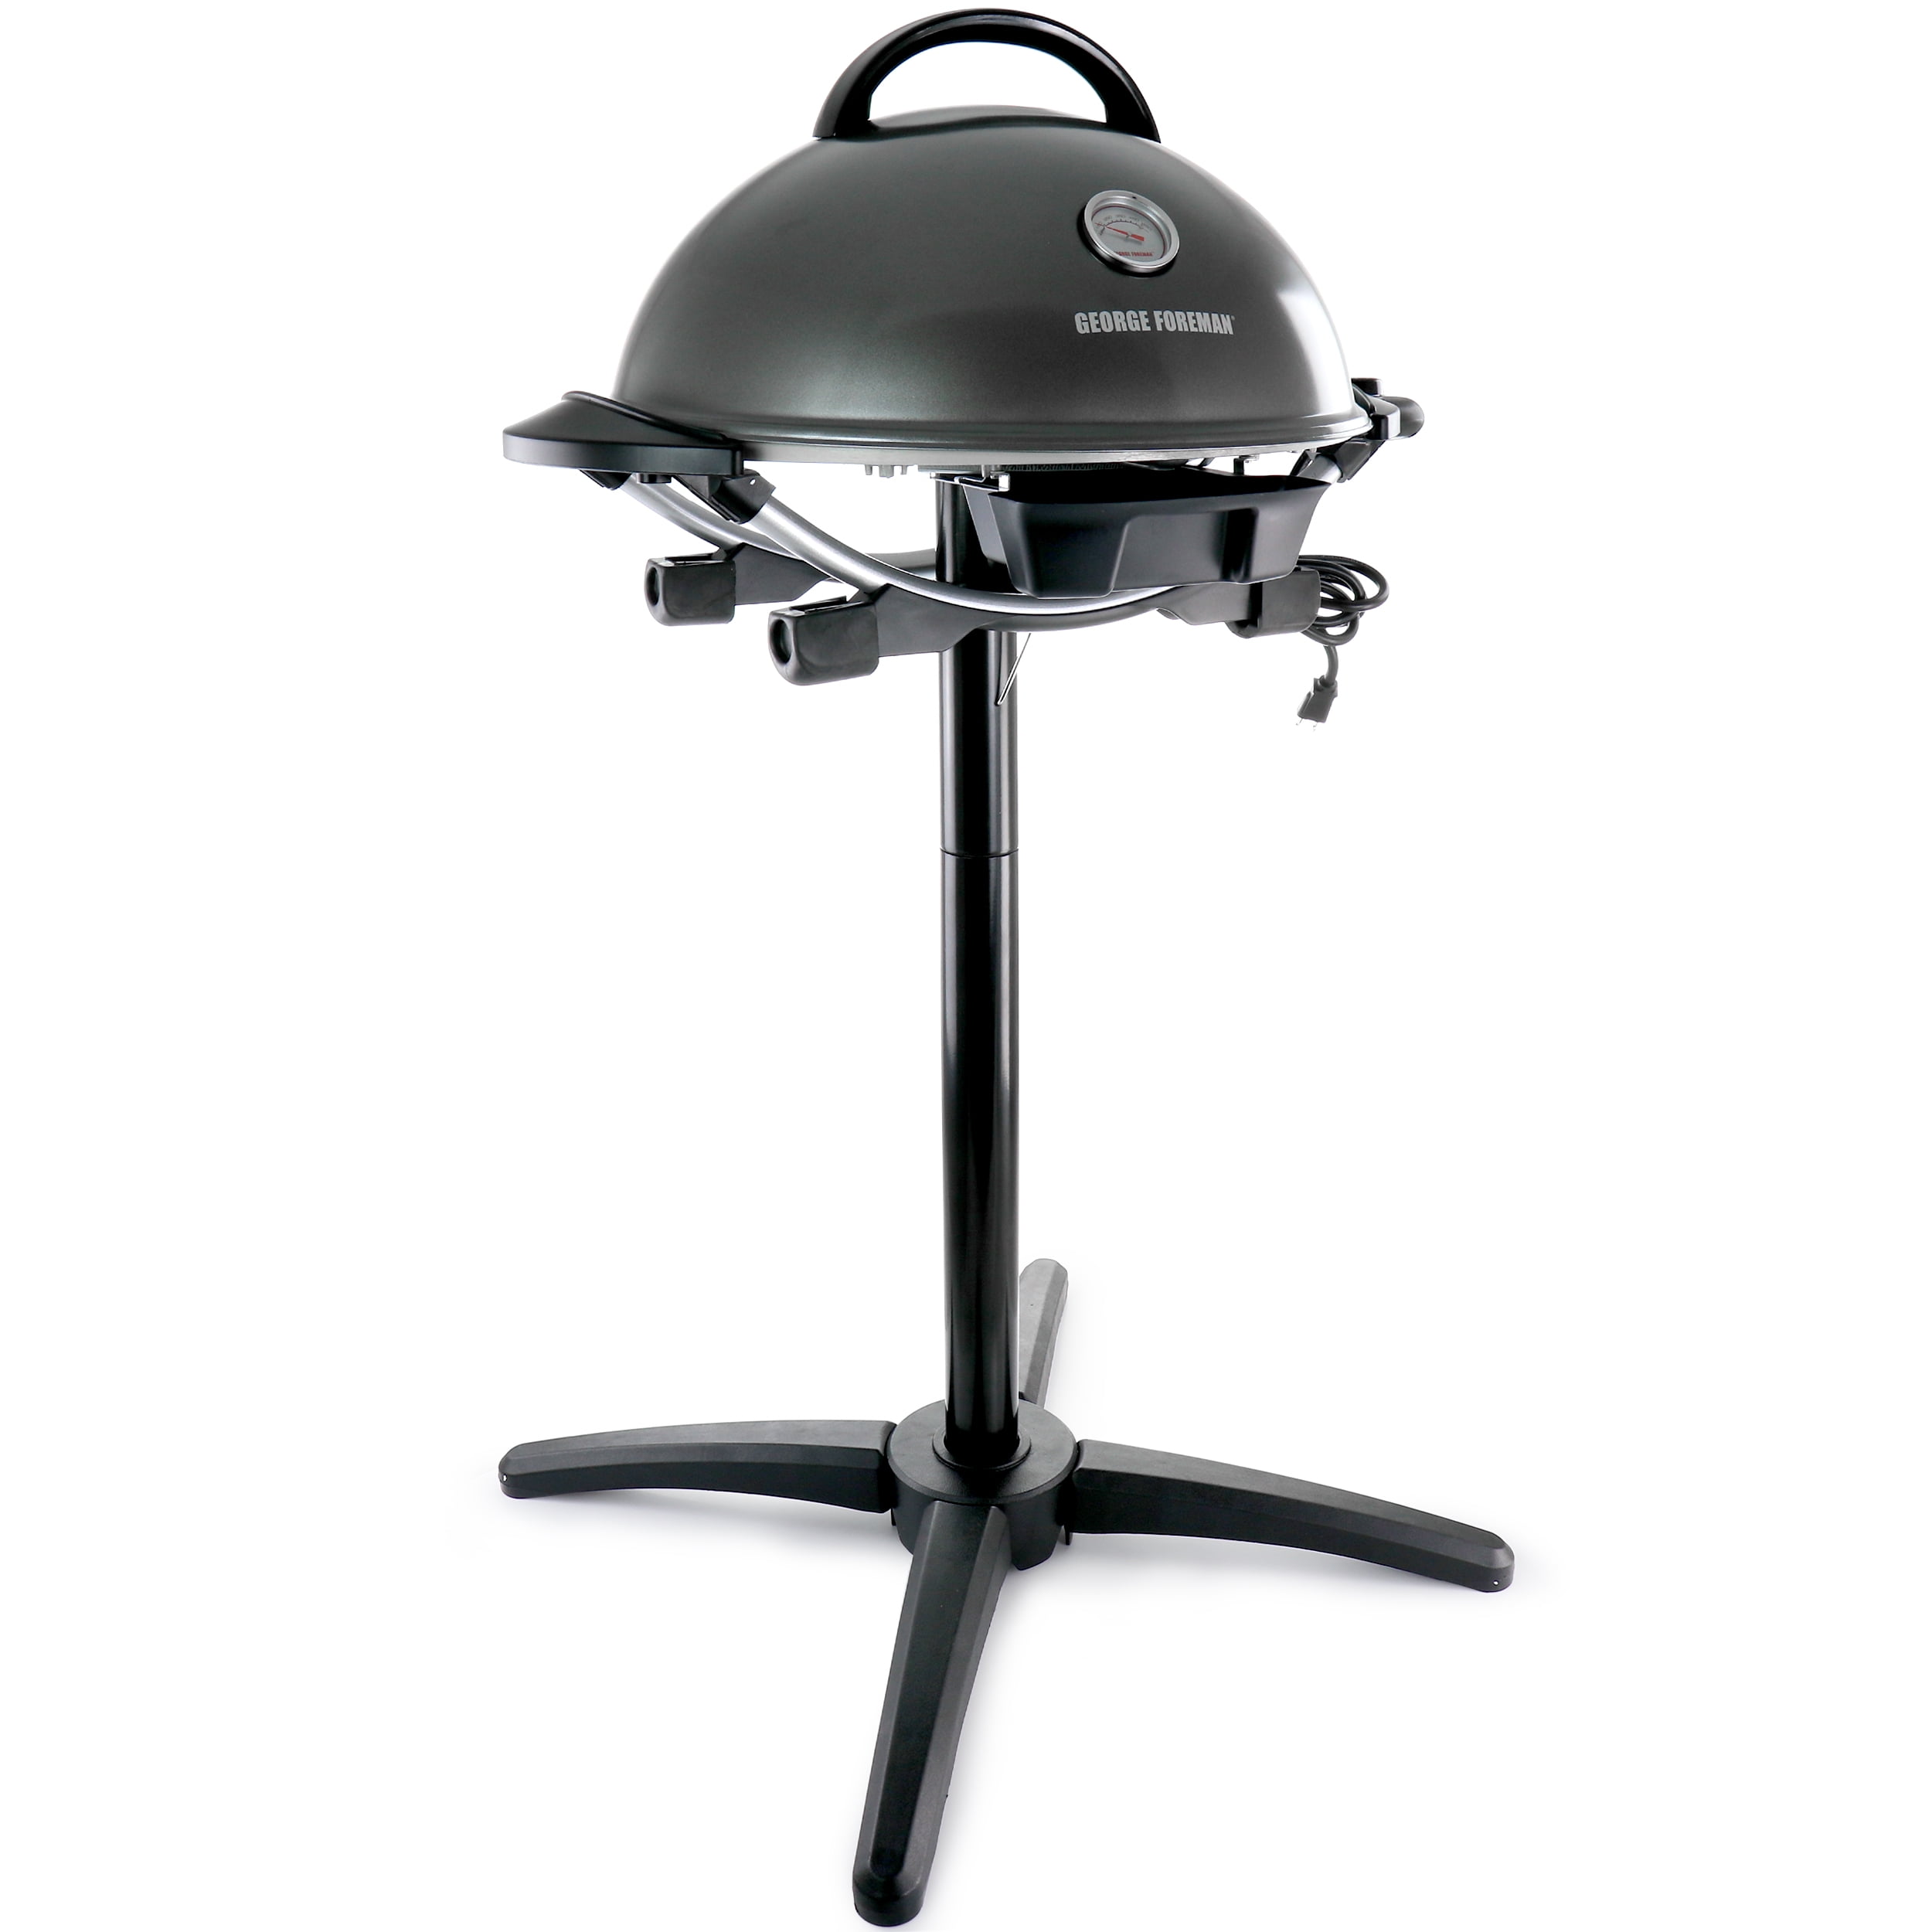 This indoor/outdoor grill is on sale for under $20, just in time